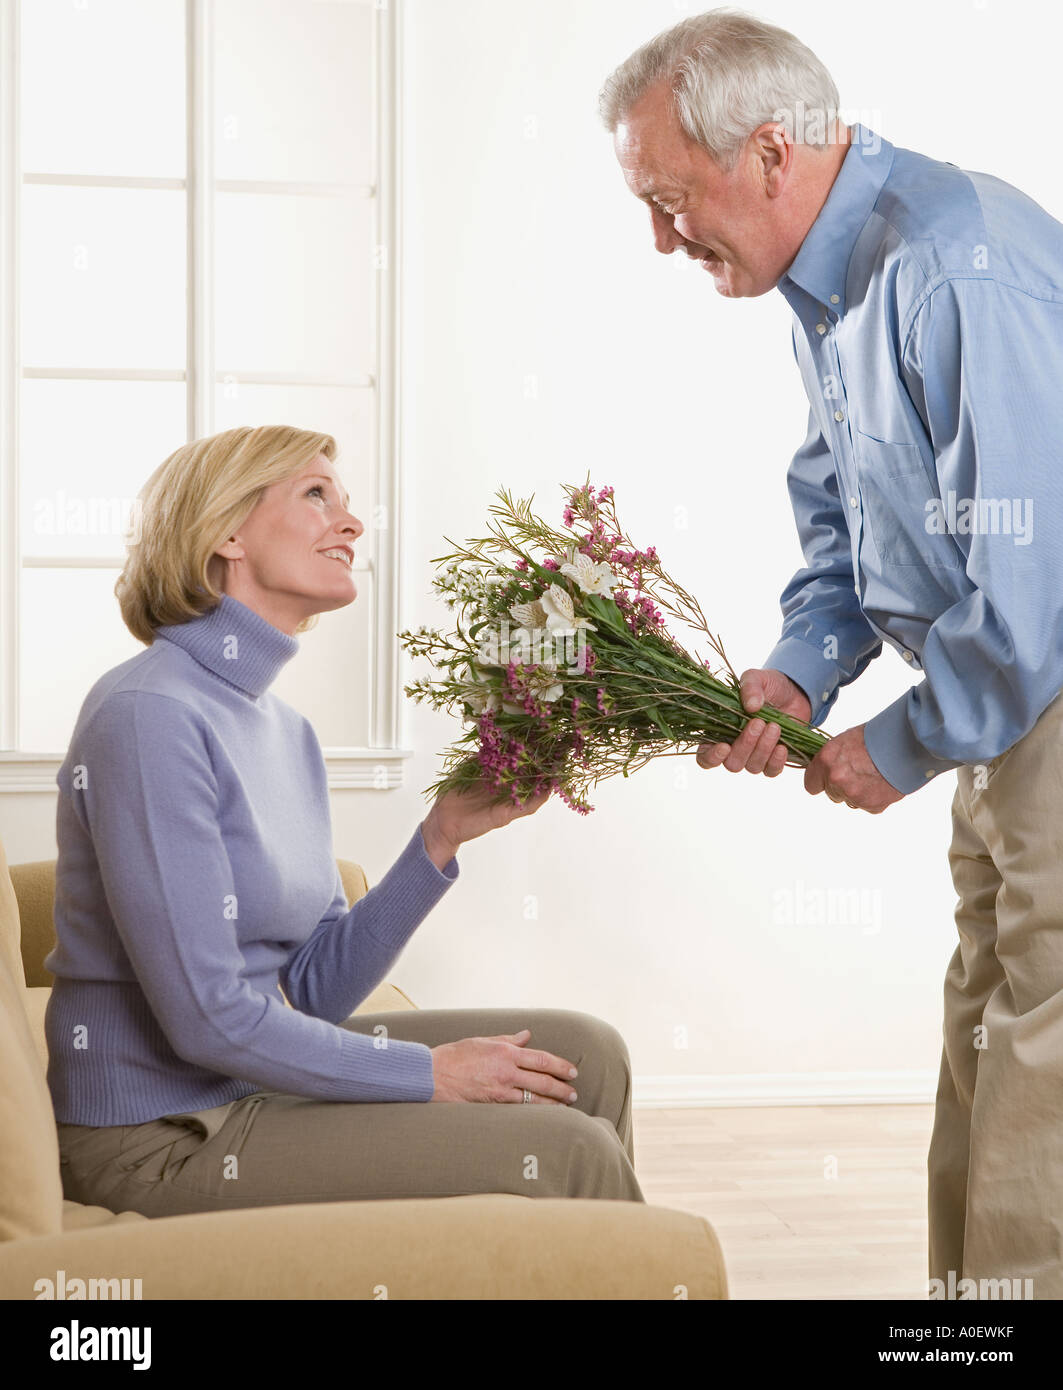 Man giving flowers to his wife Stock Photo